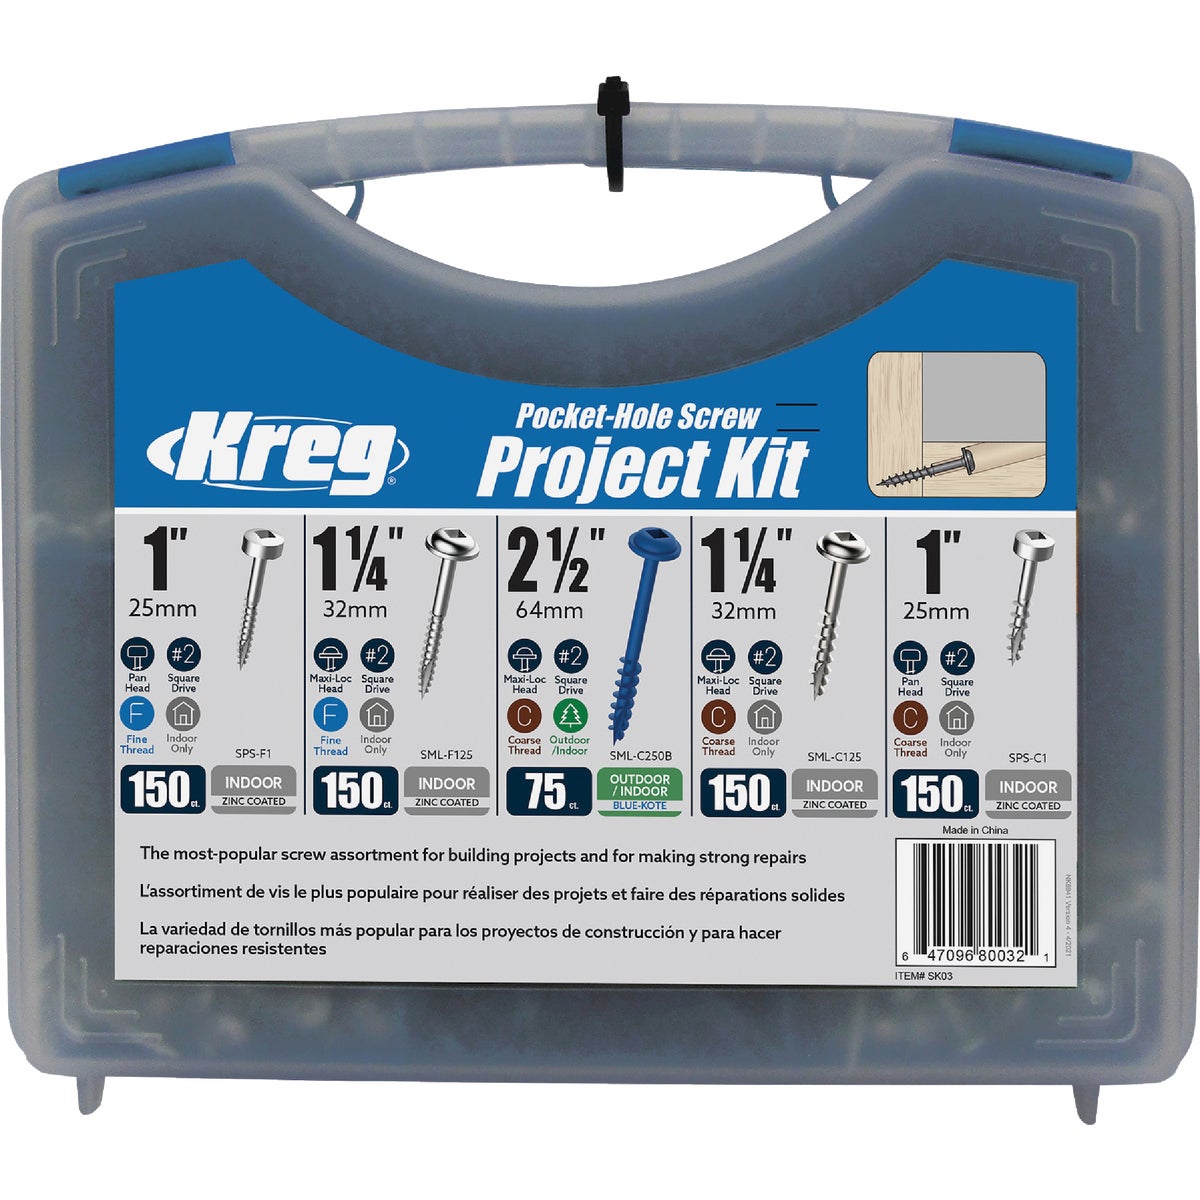 Item 320951, This kit contains five of the most popular self-tapping Kreg Screws, 